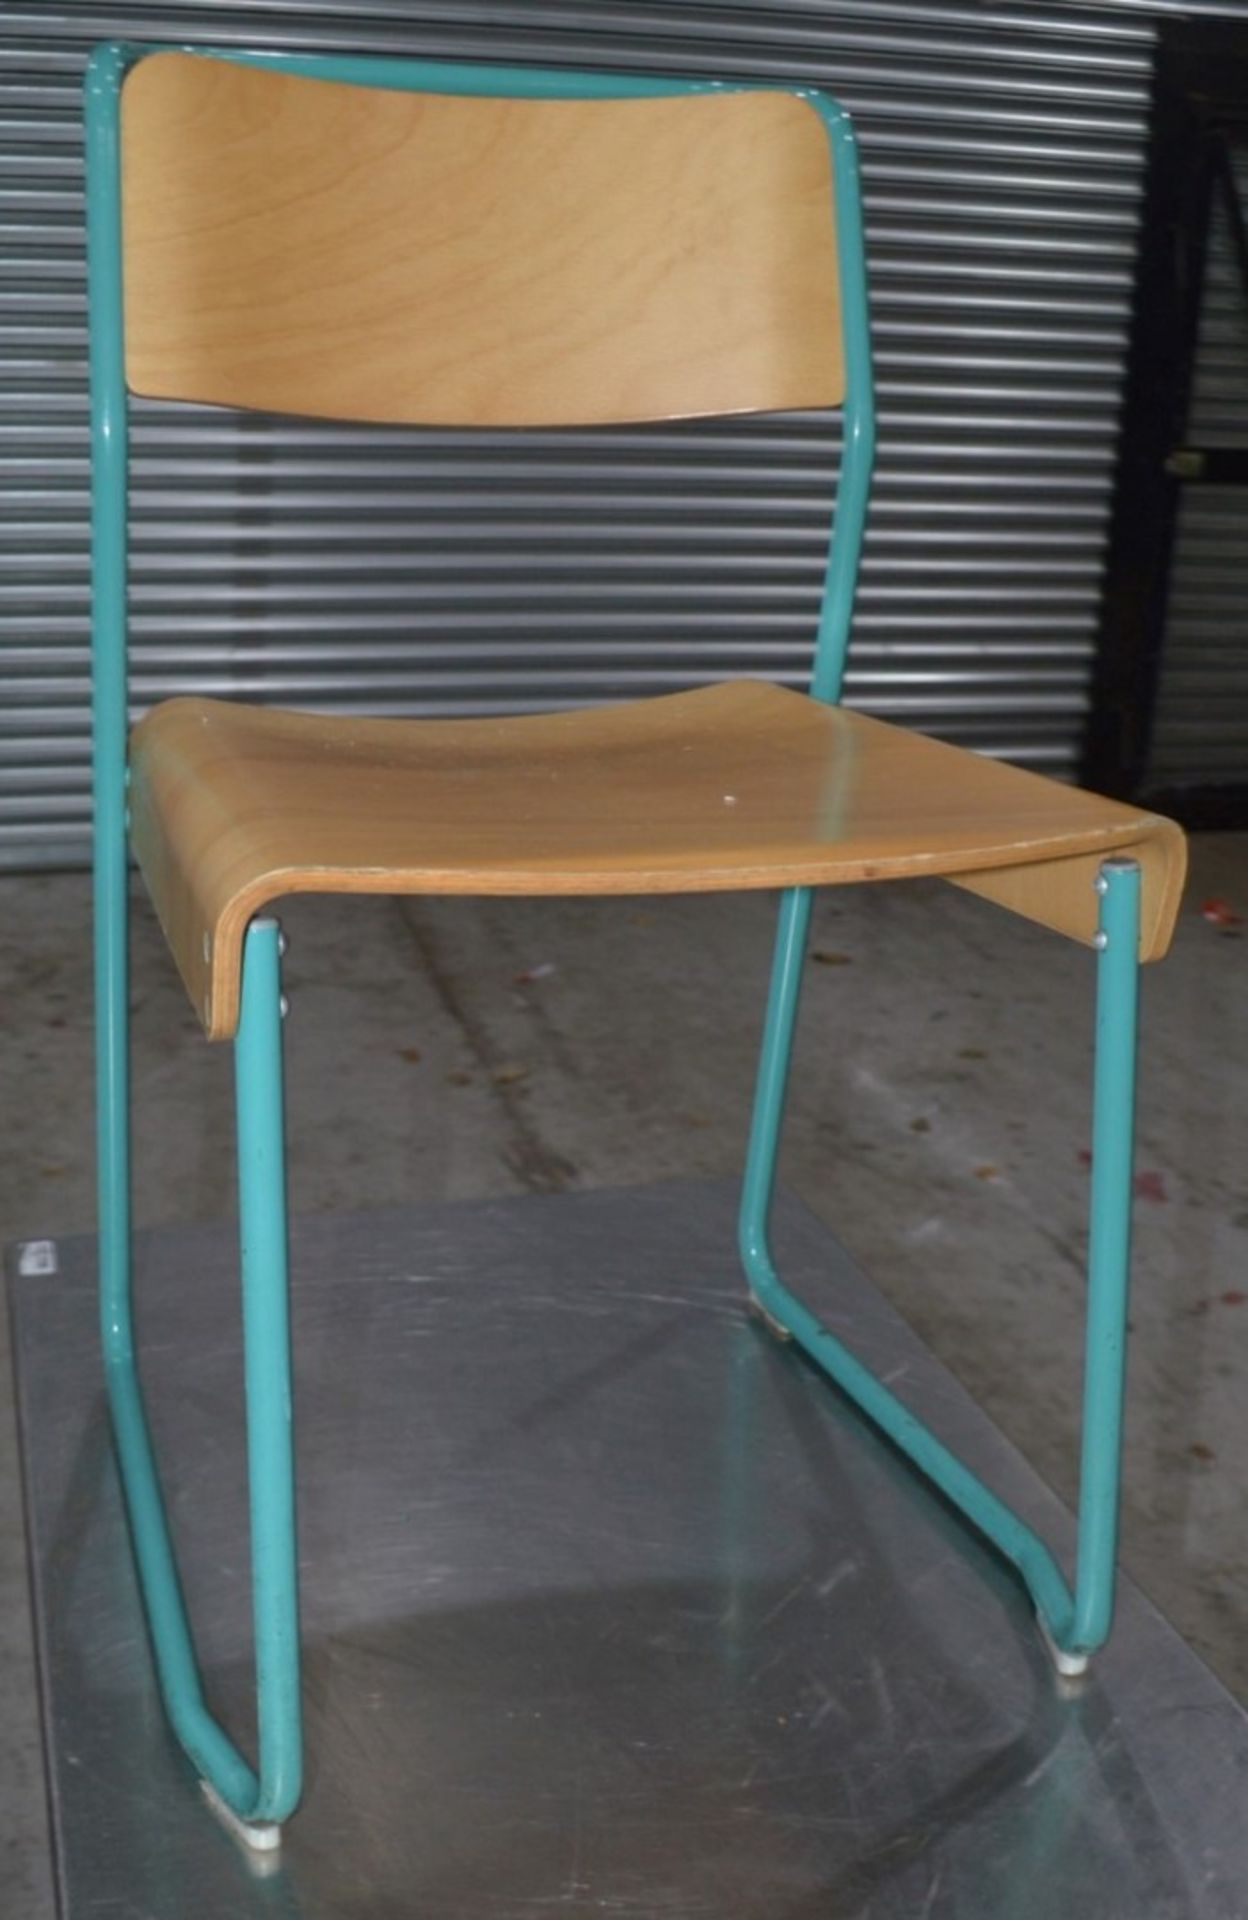 12 x Contemporary Stackable Bistro / Bar Chairs With Metal Frames In Teal With Curved Vanished - Image 11 of 11